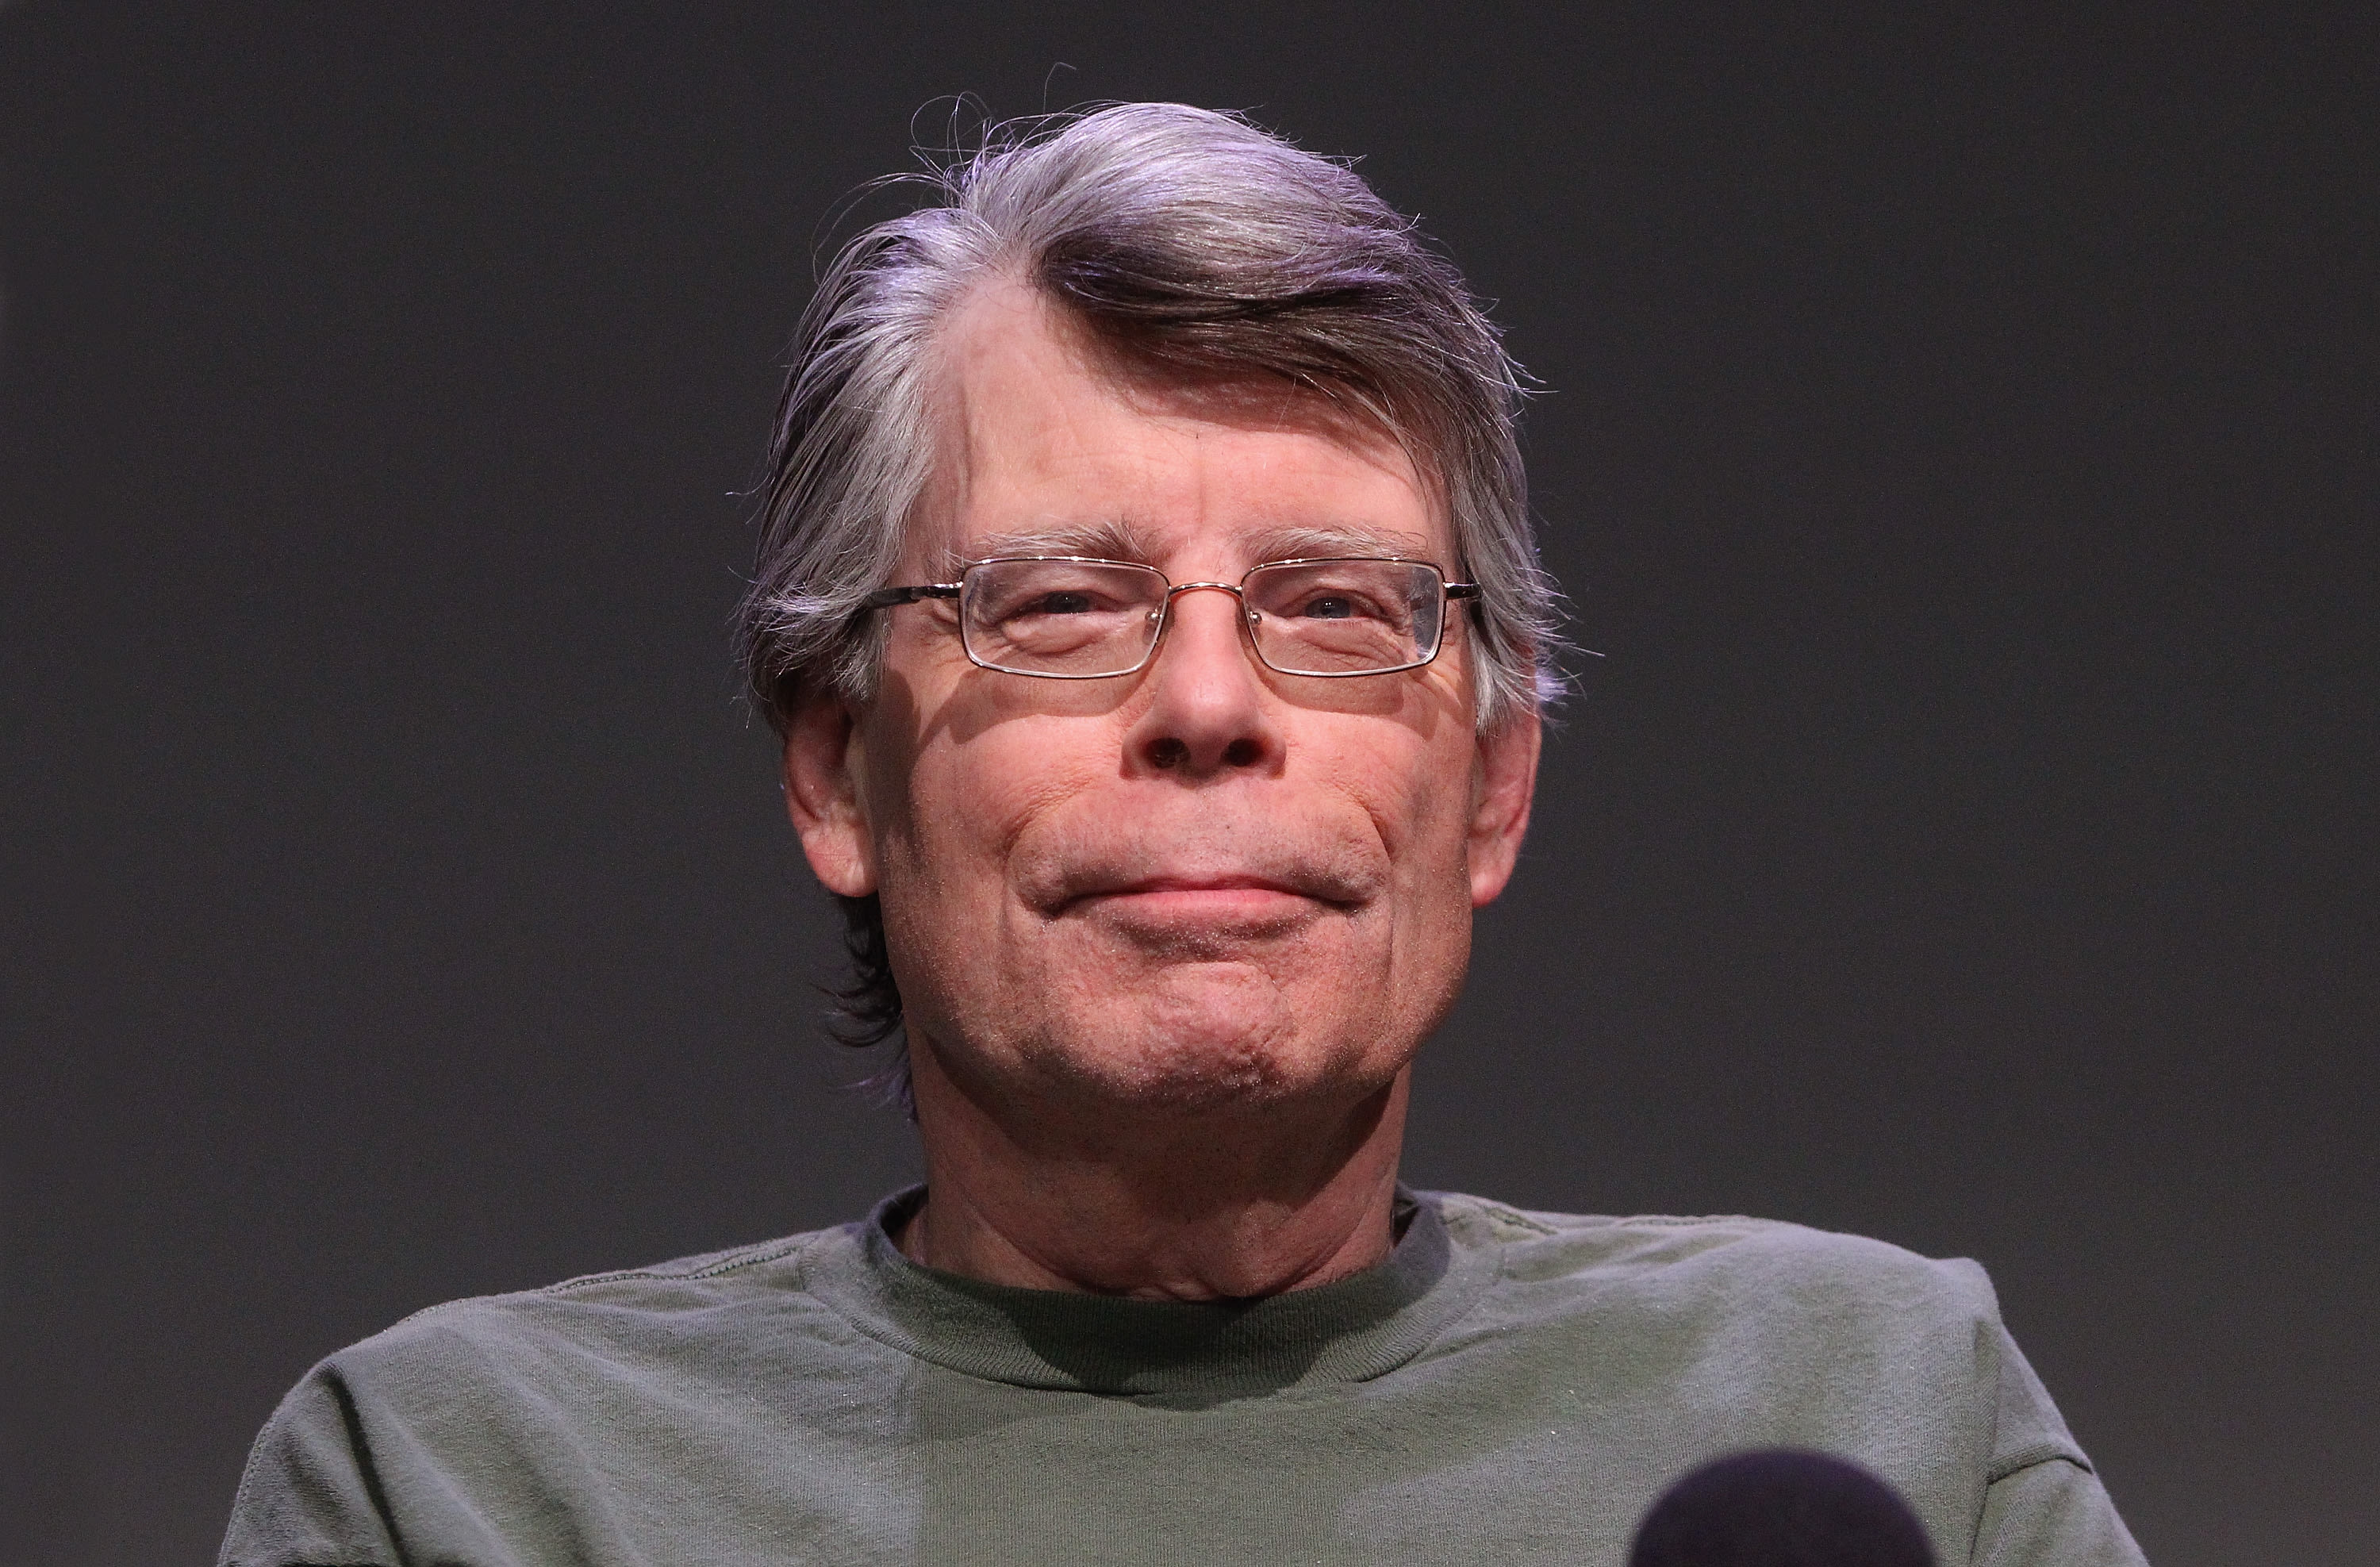 Stephen King's comment about Donald Trump killing a dog goes viral